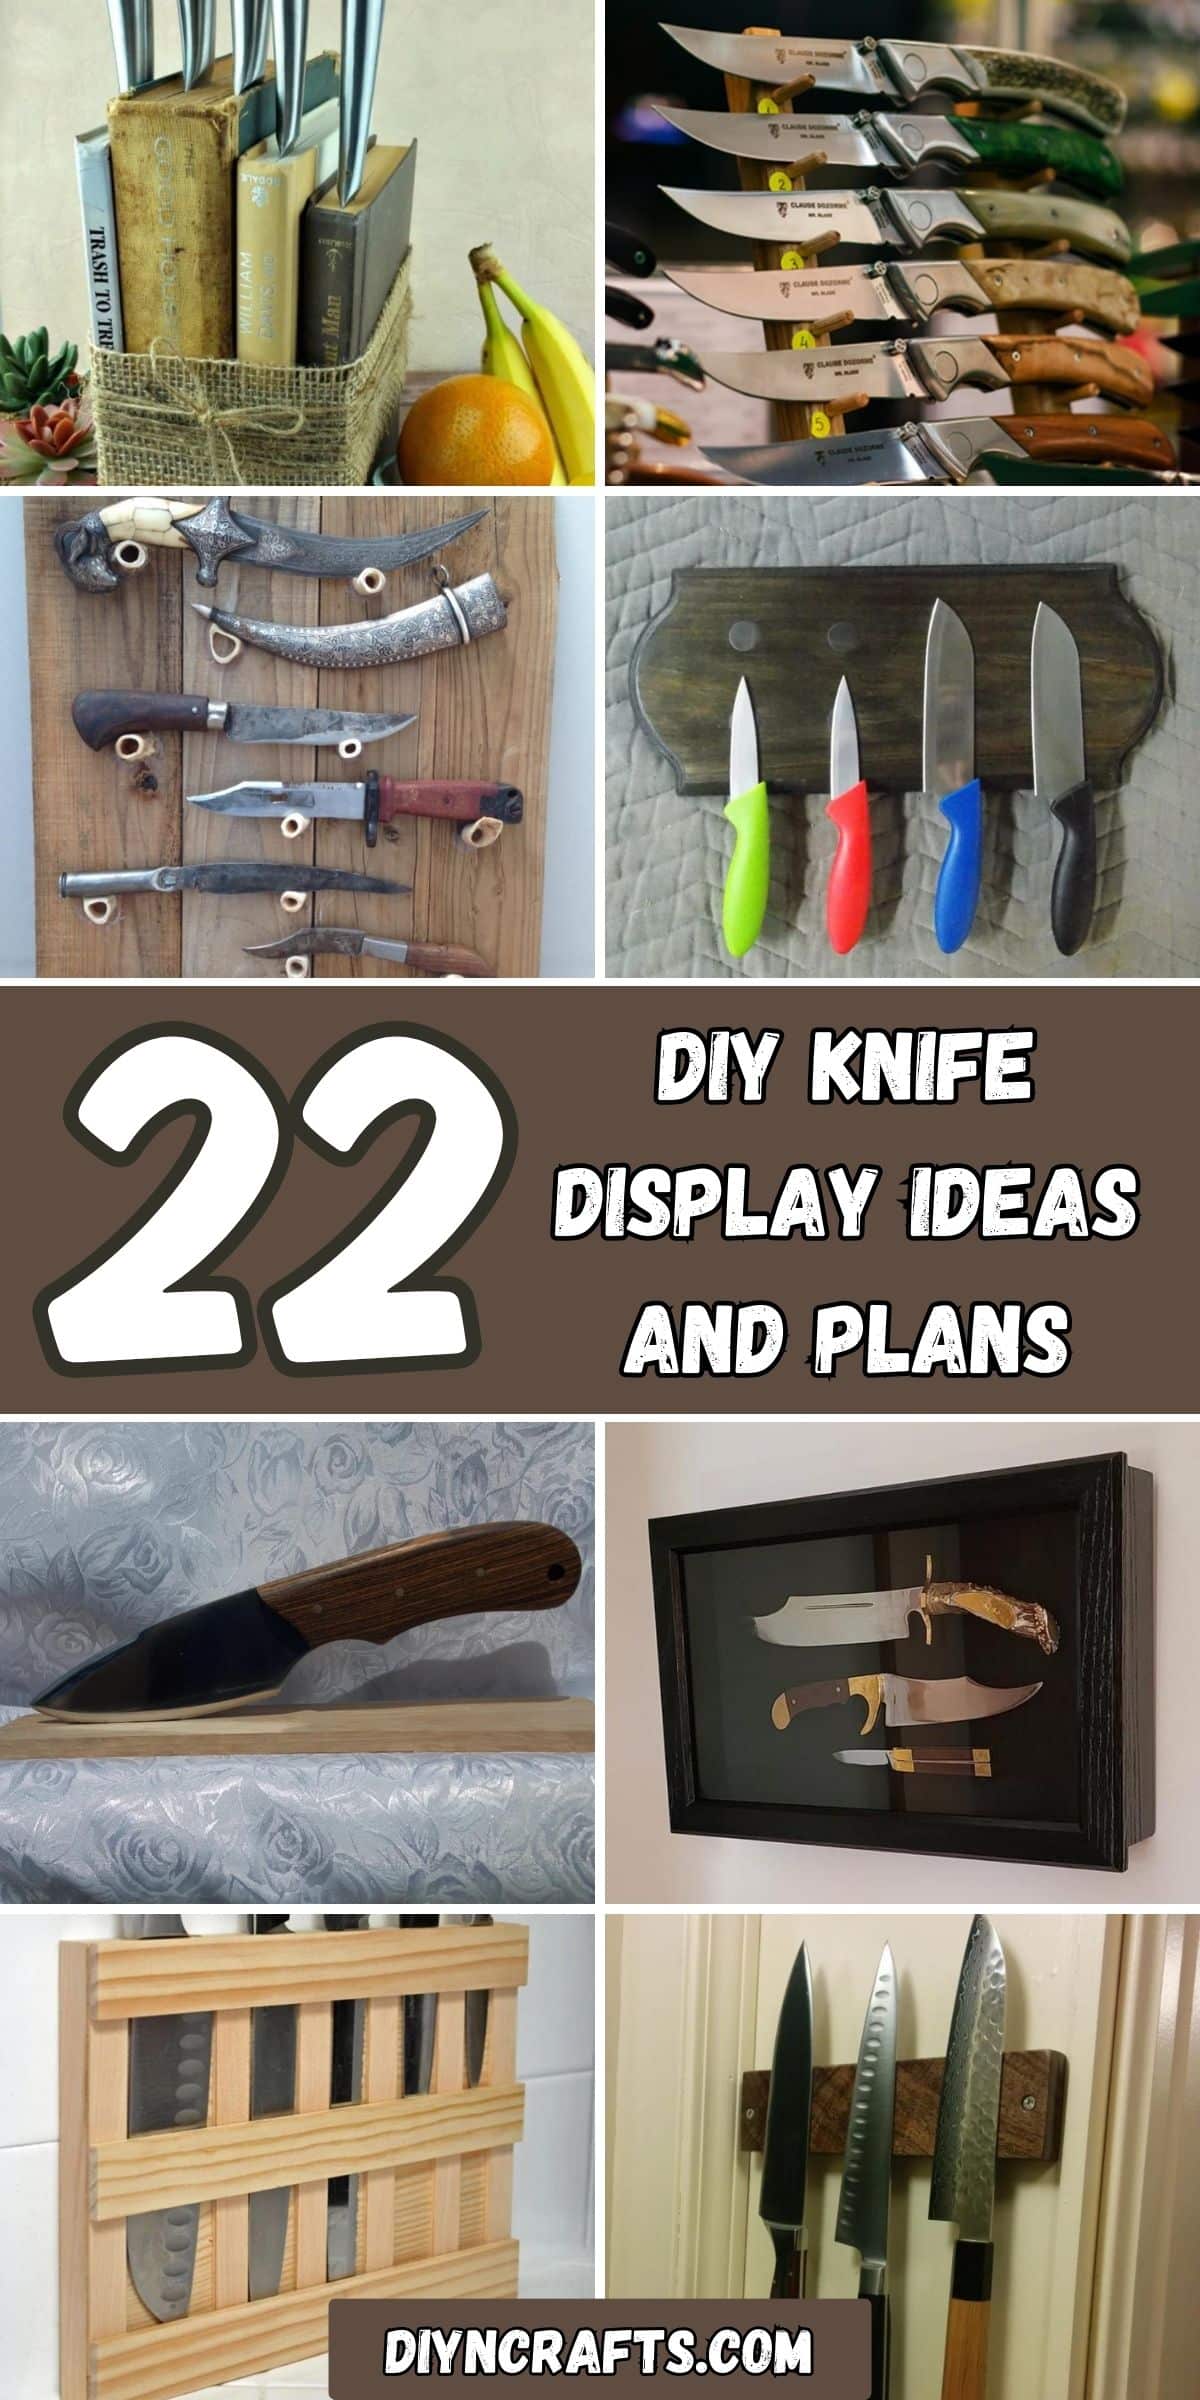 22 DIY Knife Display Ideas and Plans collage.